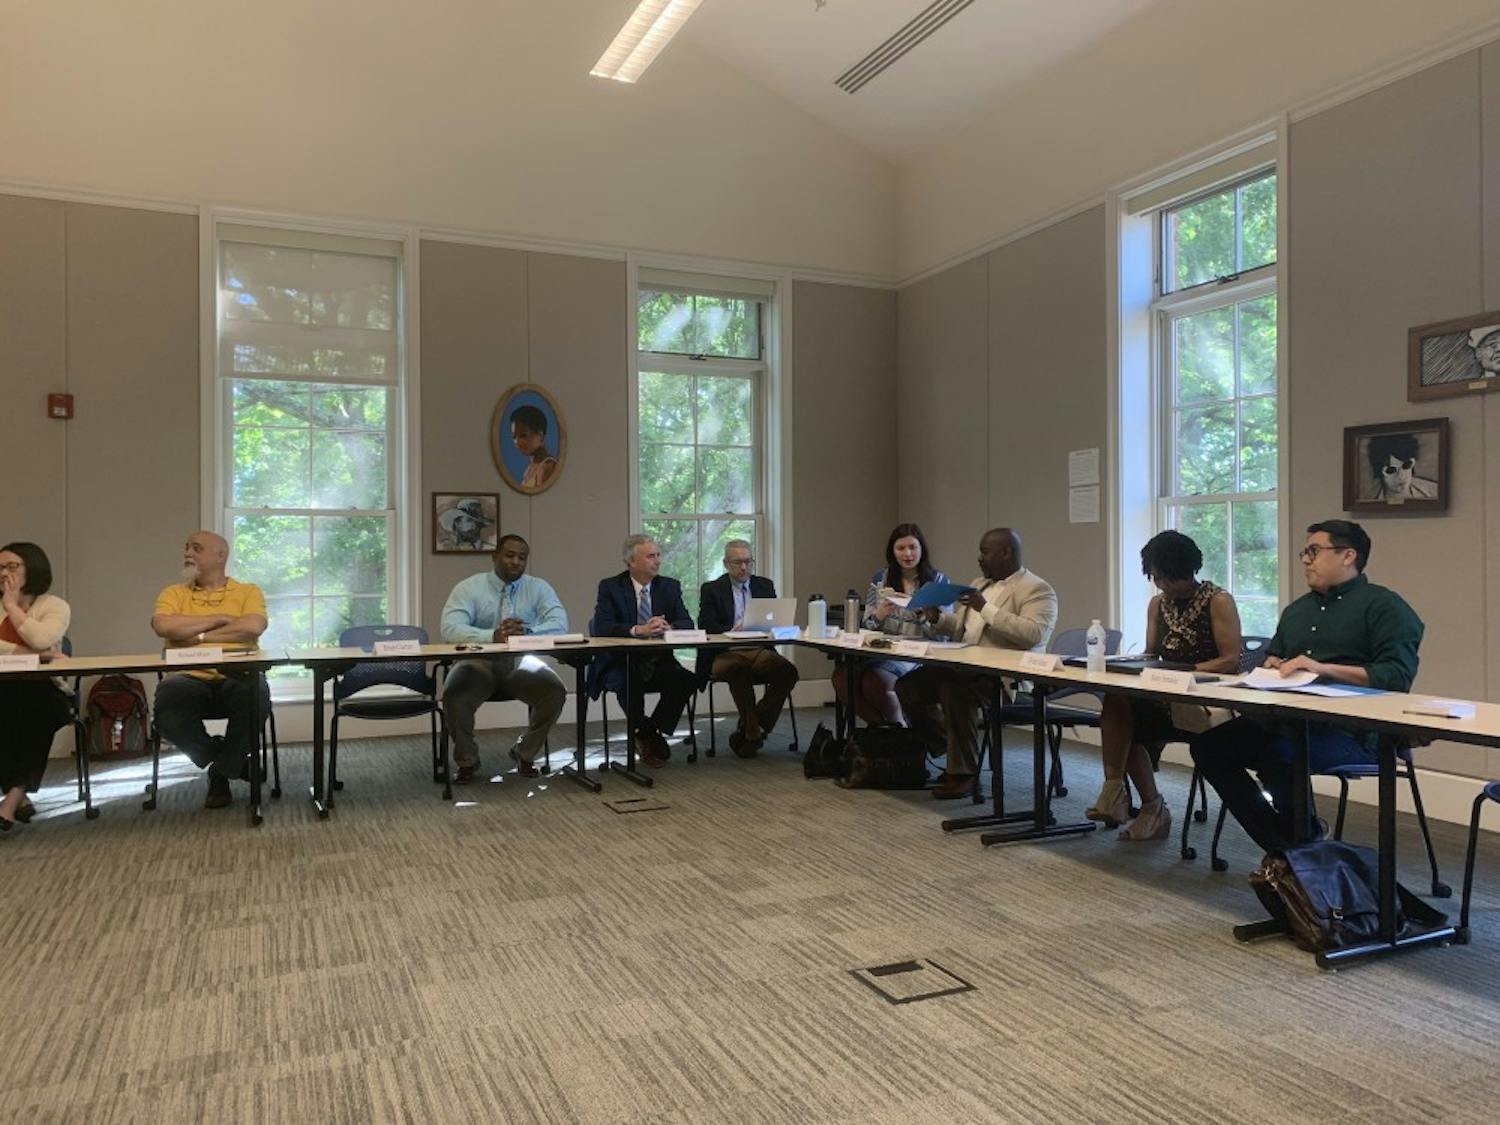 The Campus Safety Commission meeting in April 2019 in South Building&nbsp;